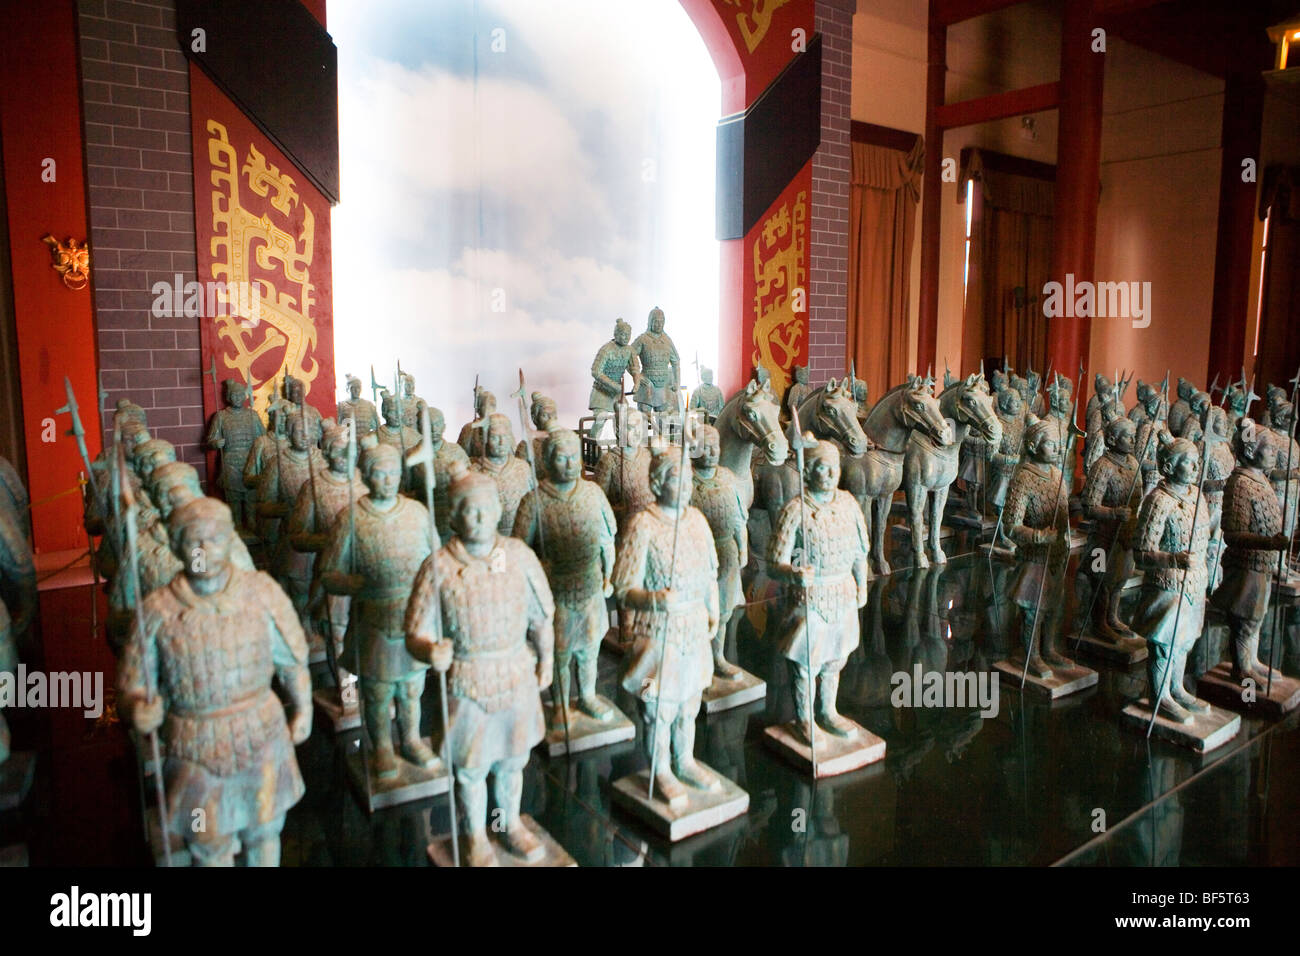 Bronze soldier figurine in The Art Of War Culture City Of China, Huimin County, Binzhou City, Shandong, China Stock Photo